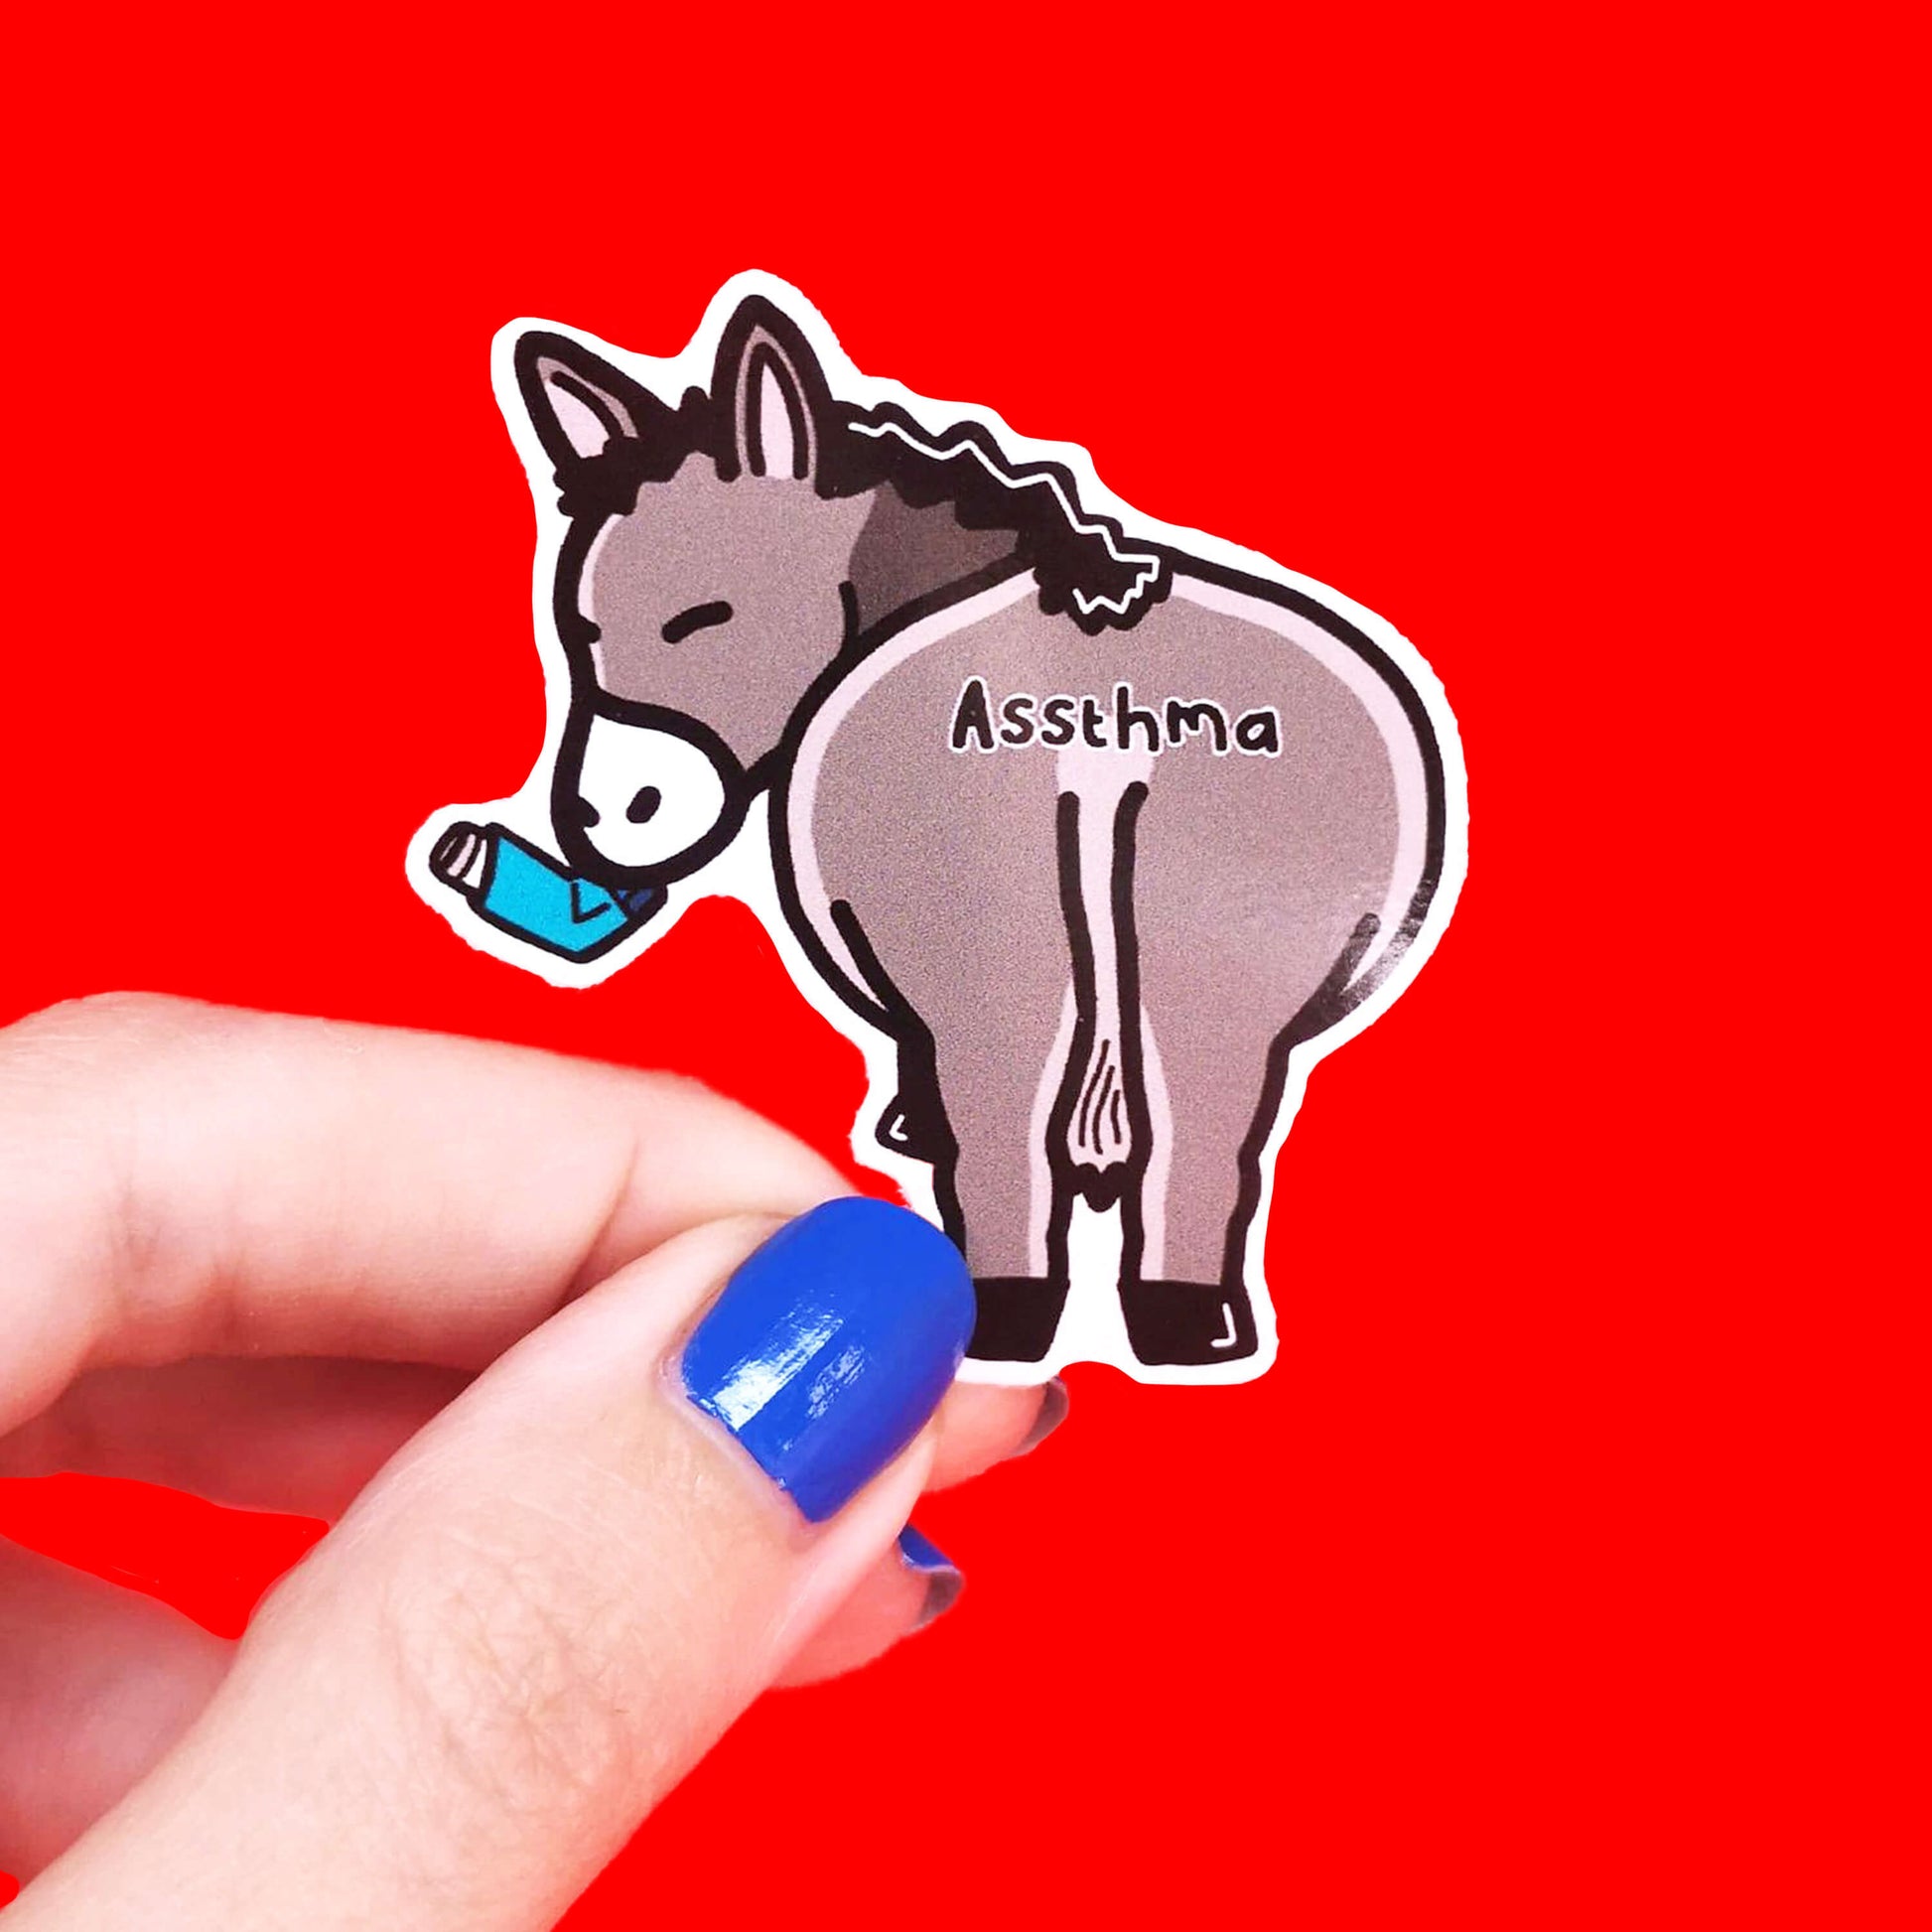 Assthma Sticker - Asthma being held over a red background by a hand with blue nail varnish. A grey donkey ass showing its behind with a blue asthma pump in its mouth and the word Assthma across its behind. The sticker is designed to raise awareness for asthma.